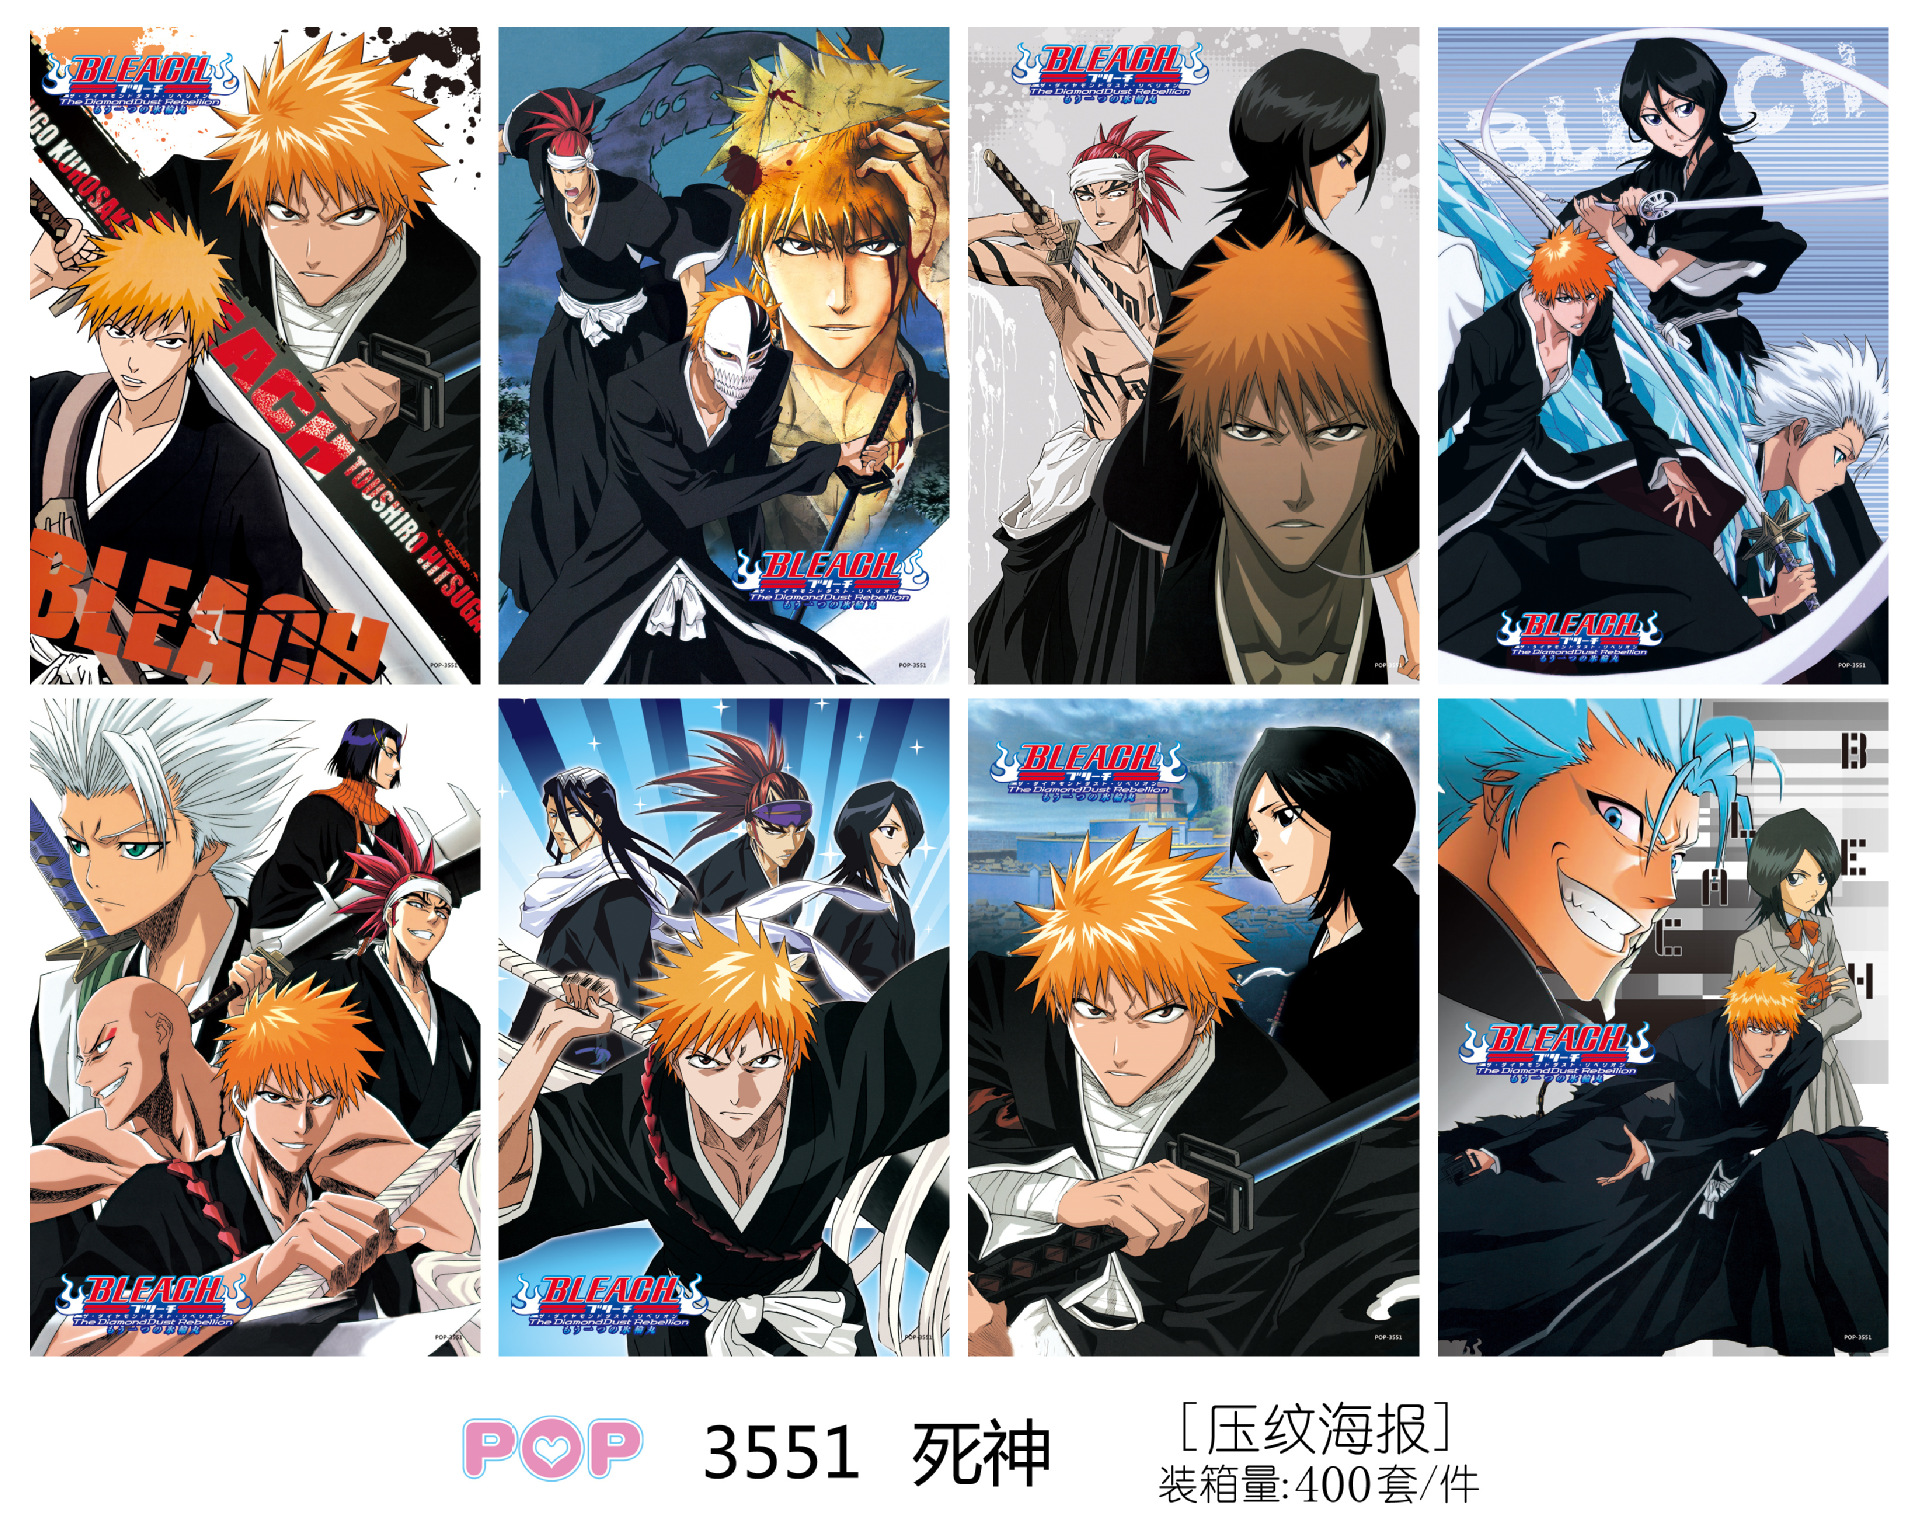 Bleach anime poster price for a set of 8 pcs